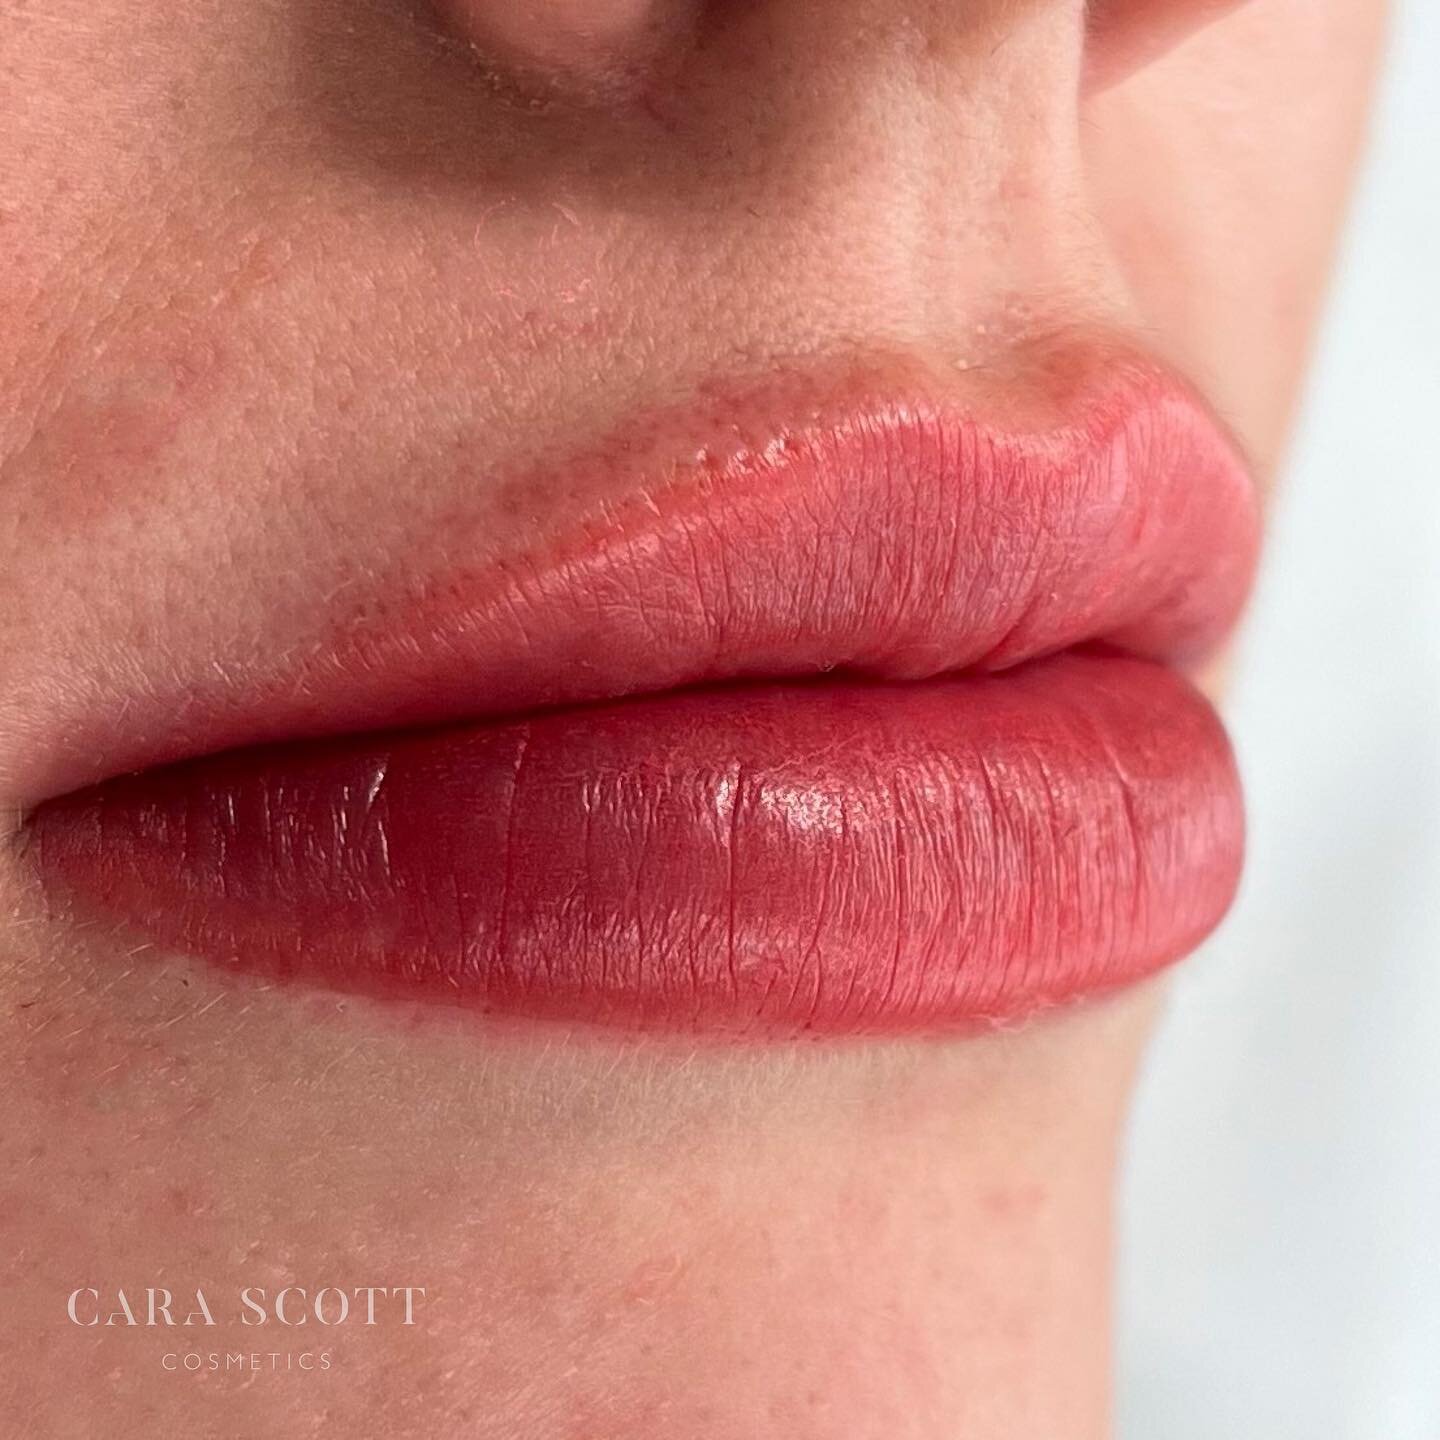 Lip Blush Gloss and Go Treatment straight after with no balm 👄The lips usually experience some temporary swelling that will go down a few hours after. This treatment does not enhance the volume of your lips, it defines your natural shape with colour